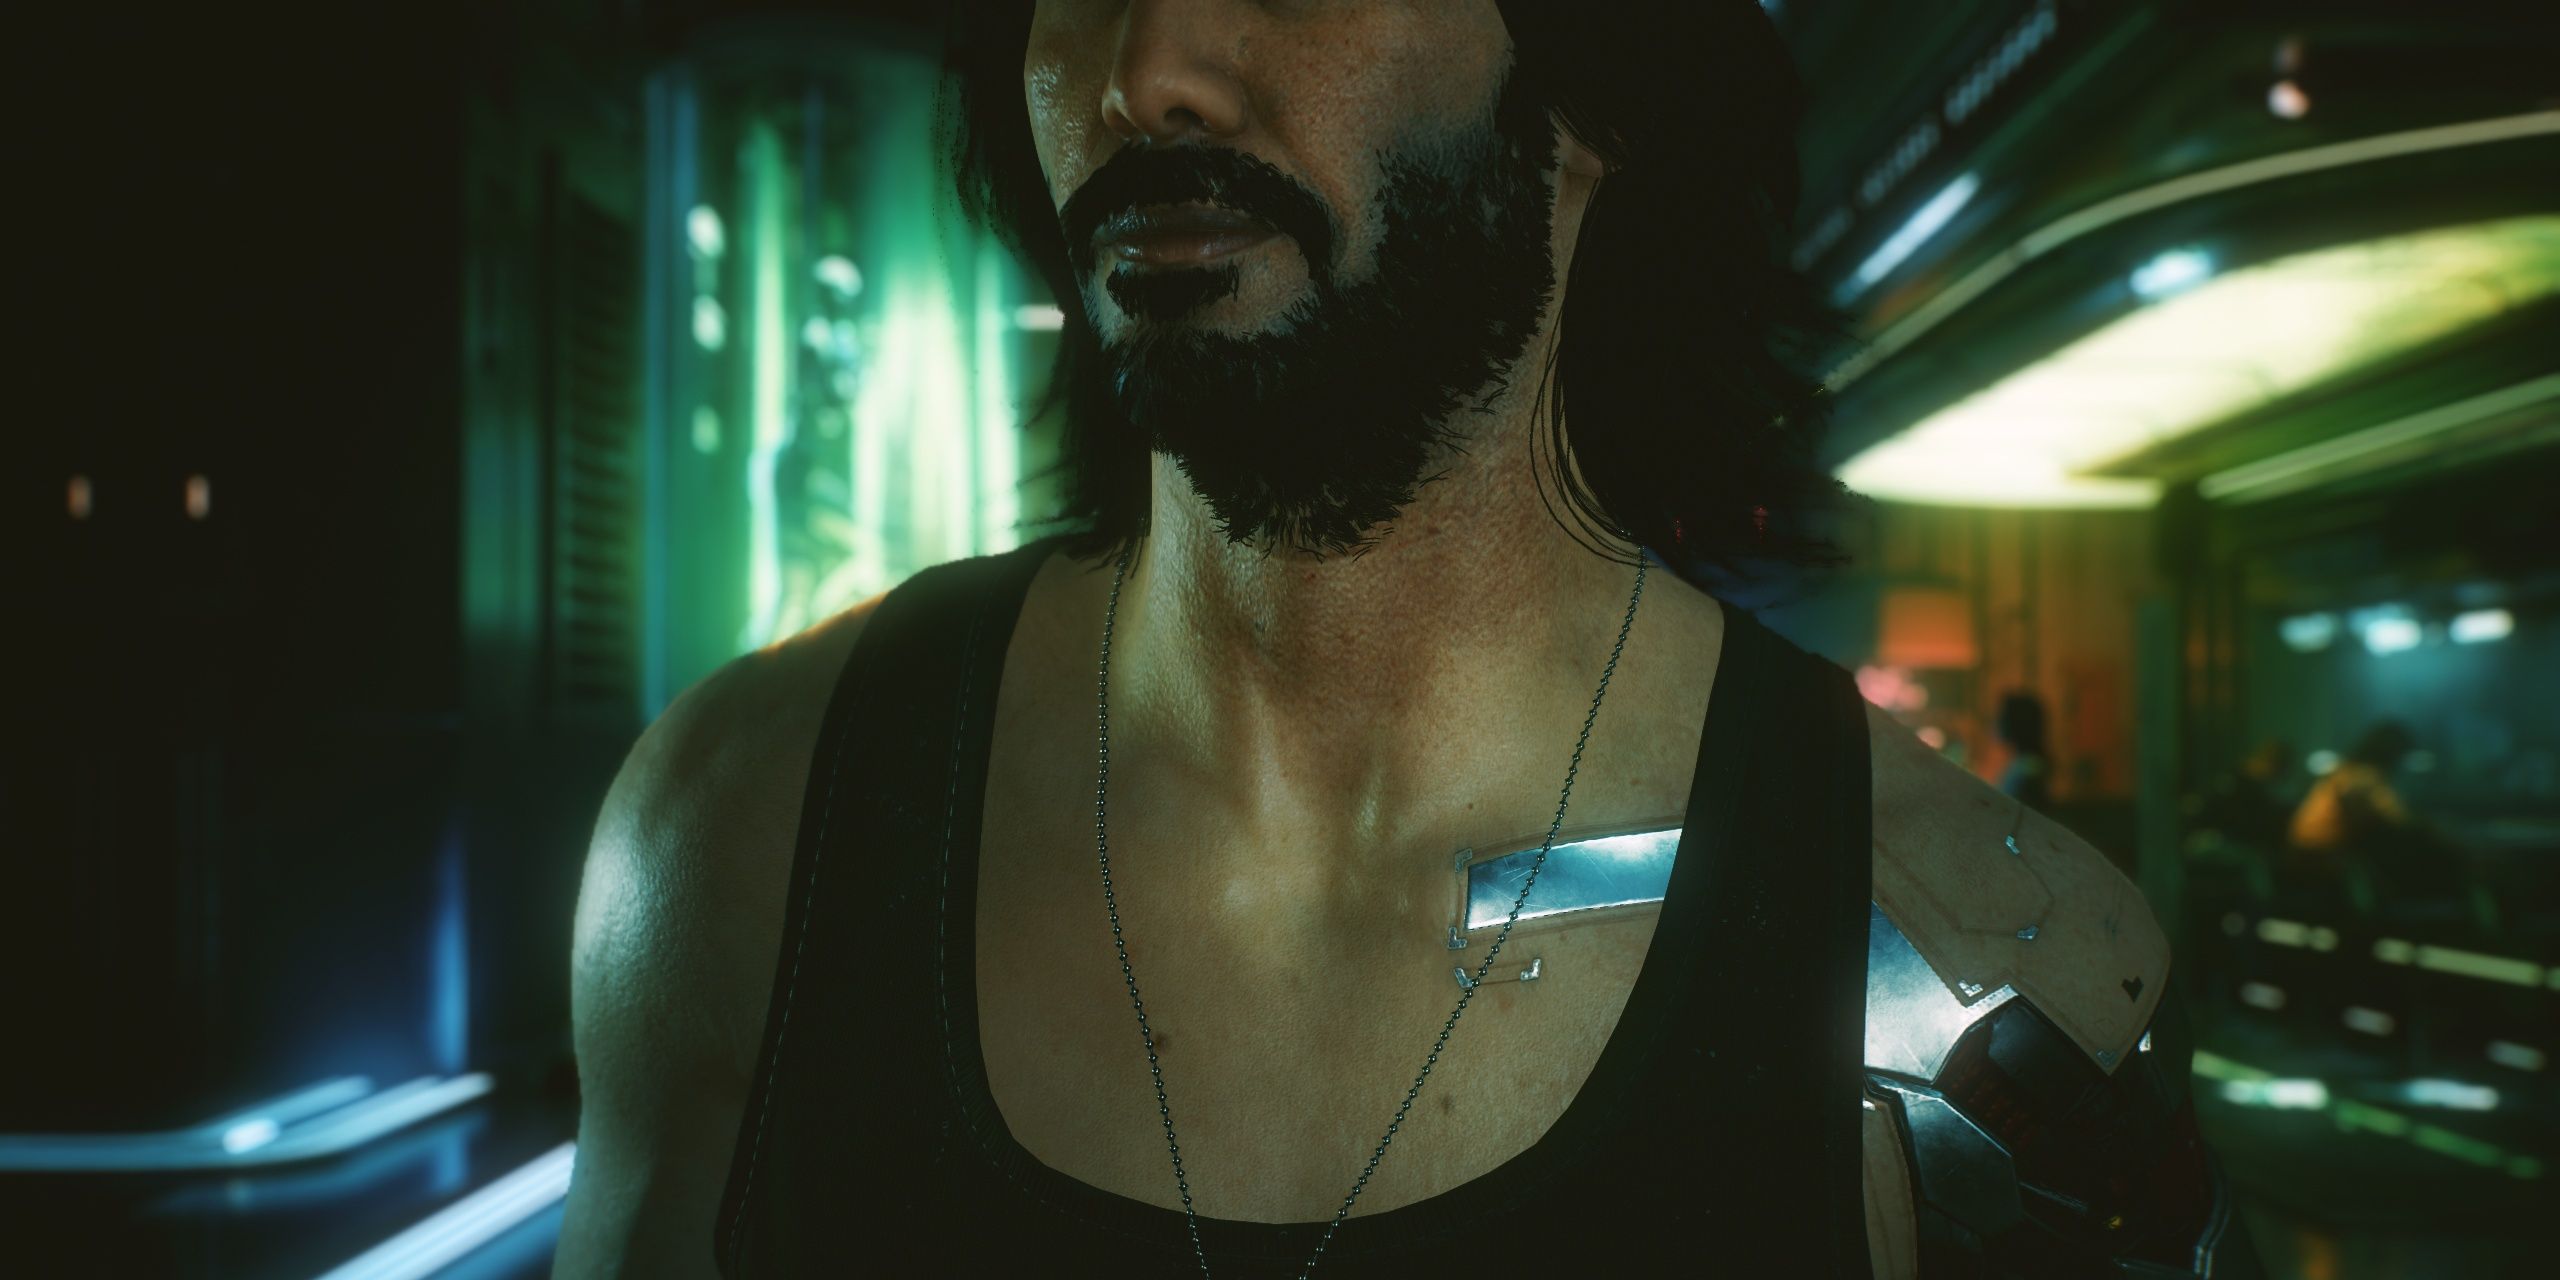 Thicker Beard For Johnny mod for Cyberpunk 2077